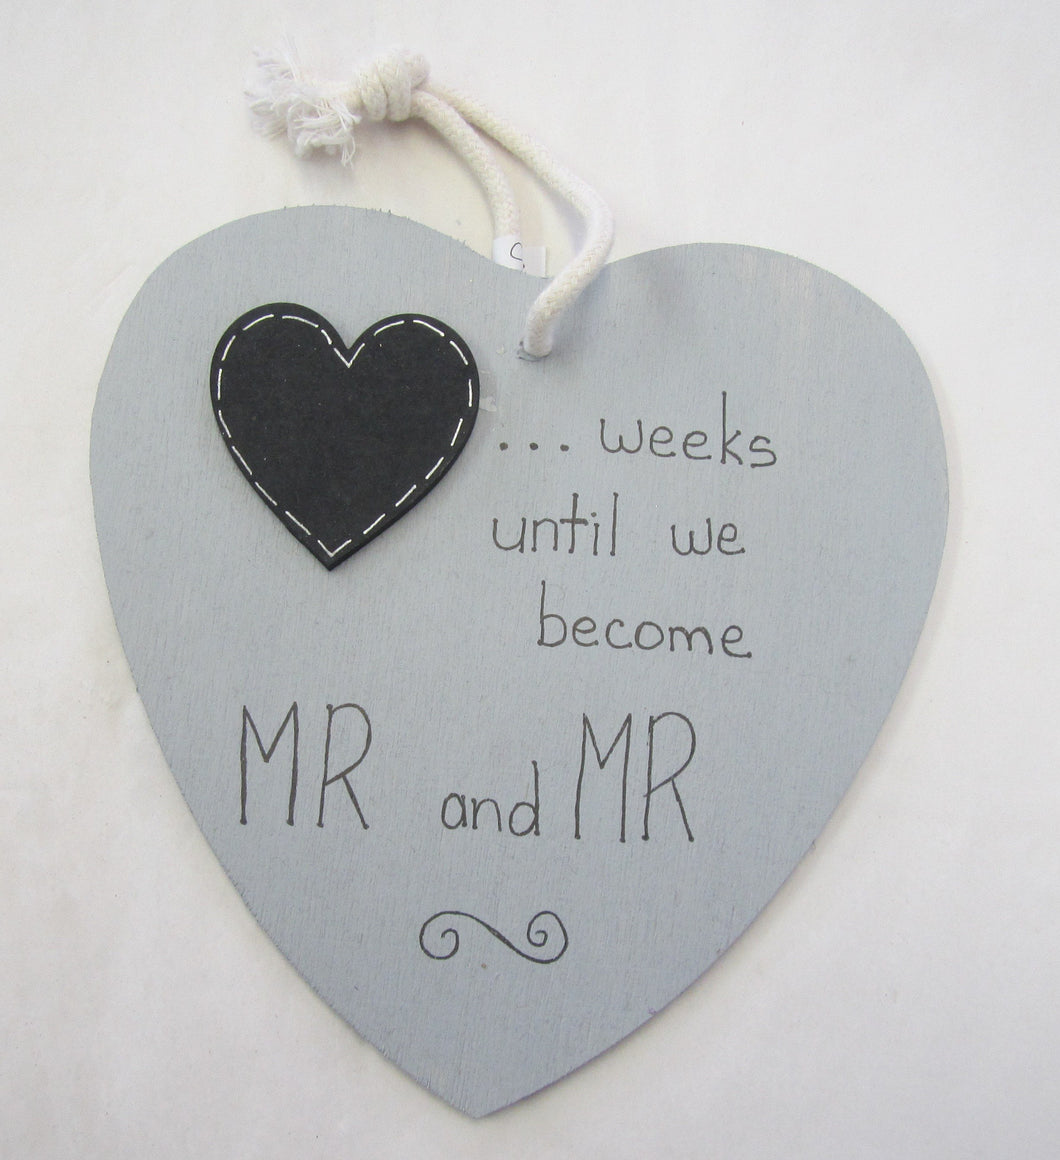 Beautiful handcrafted heart - weeks until we become Mr & Mr